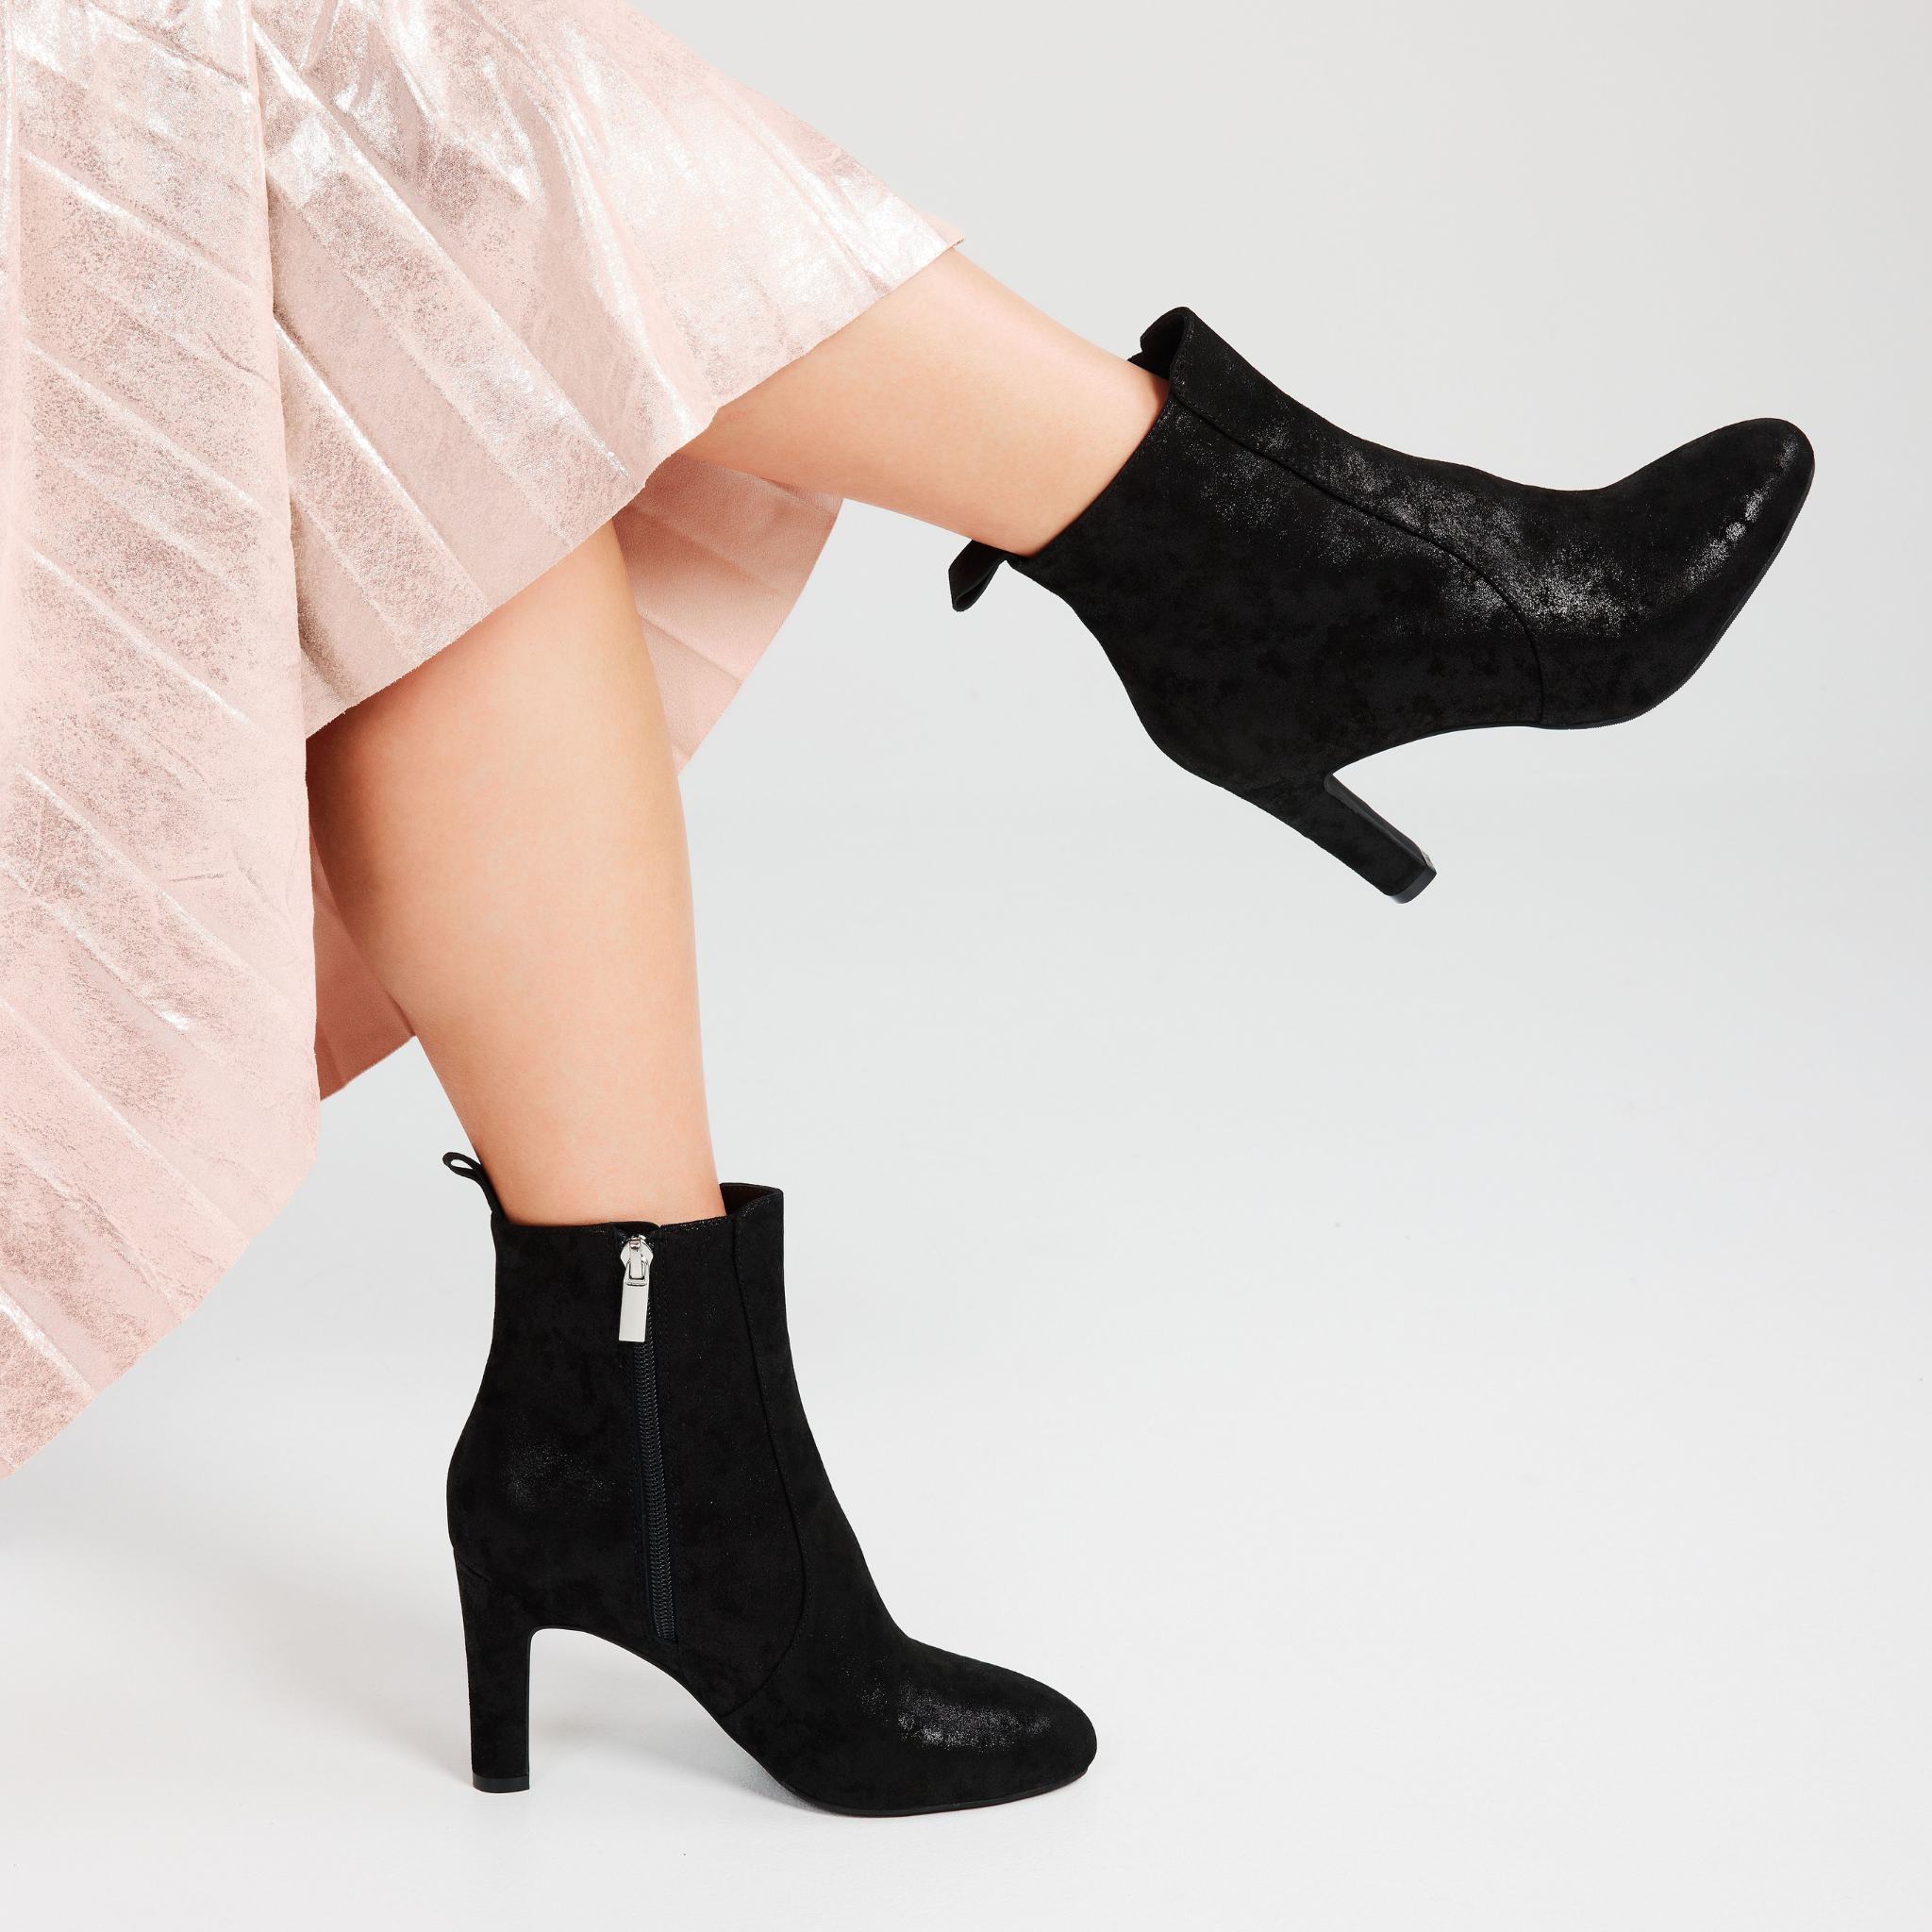 Luna Leather Mid Heel Ankle Boots